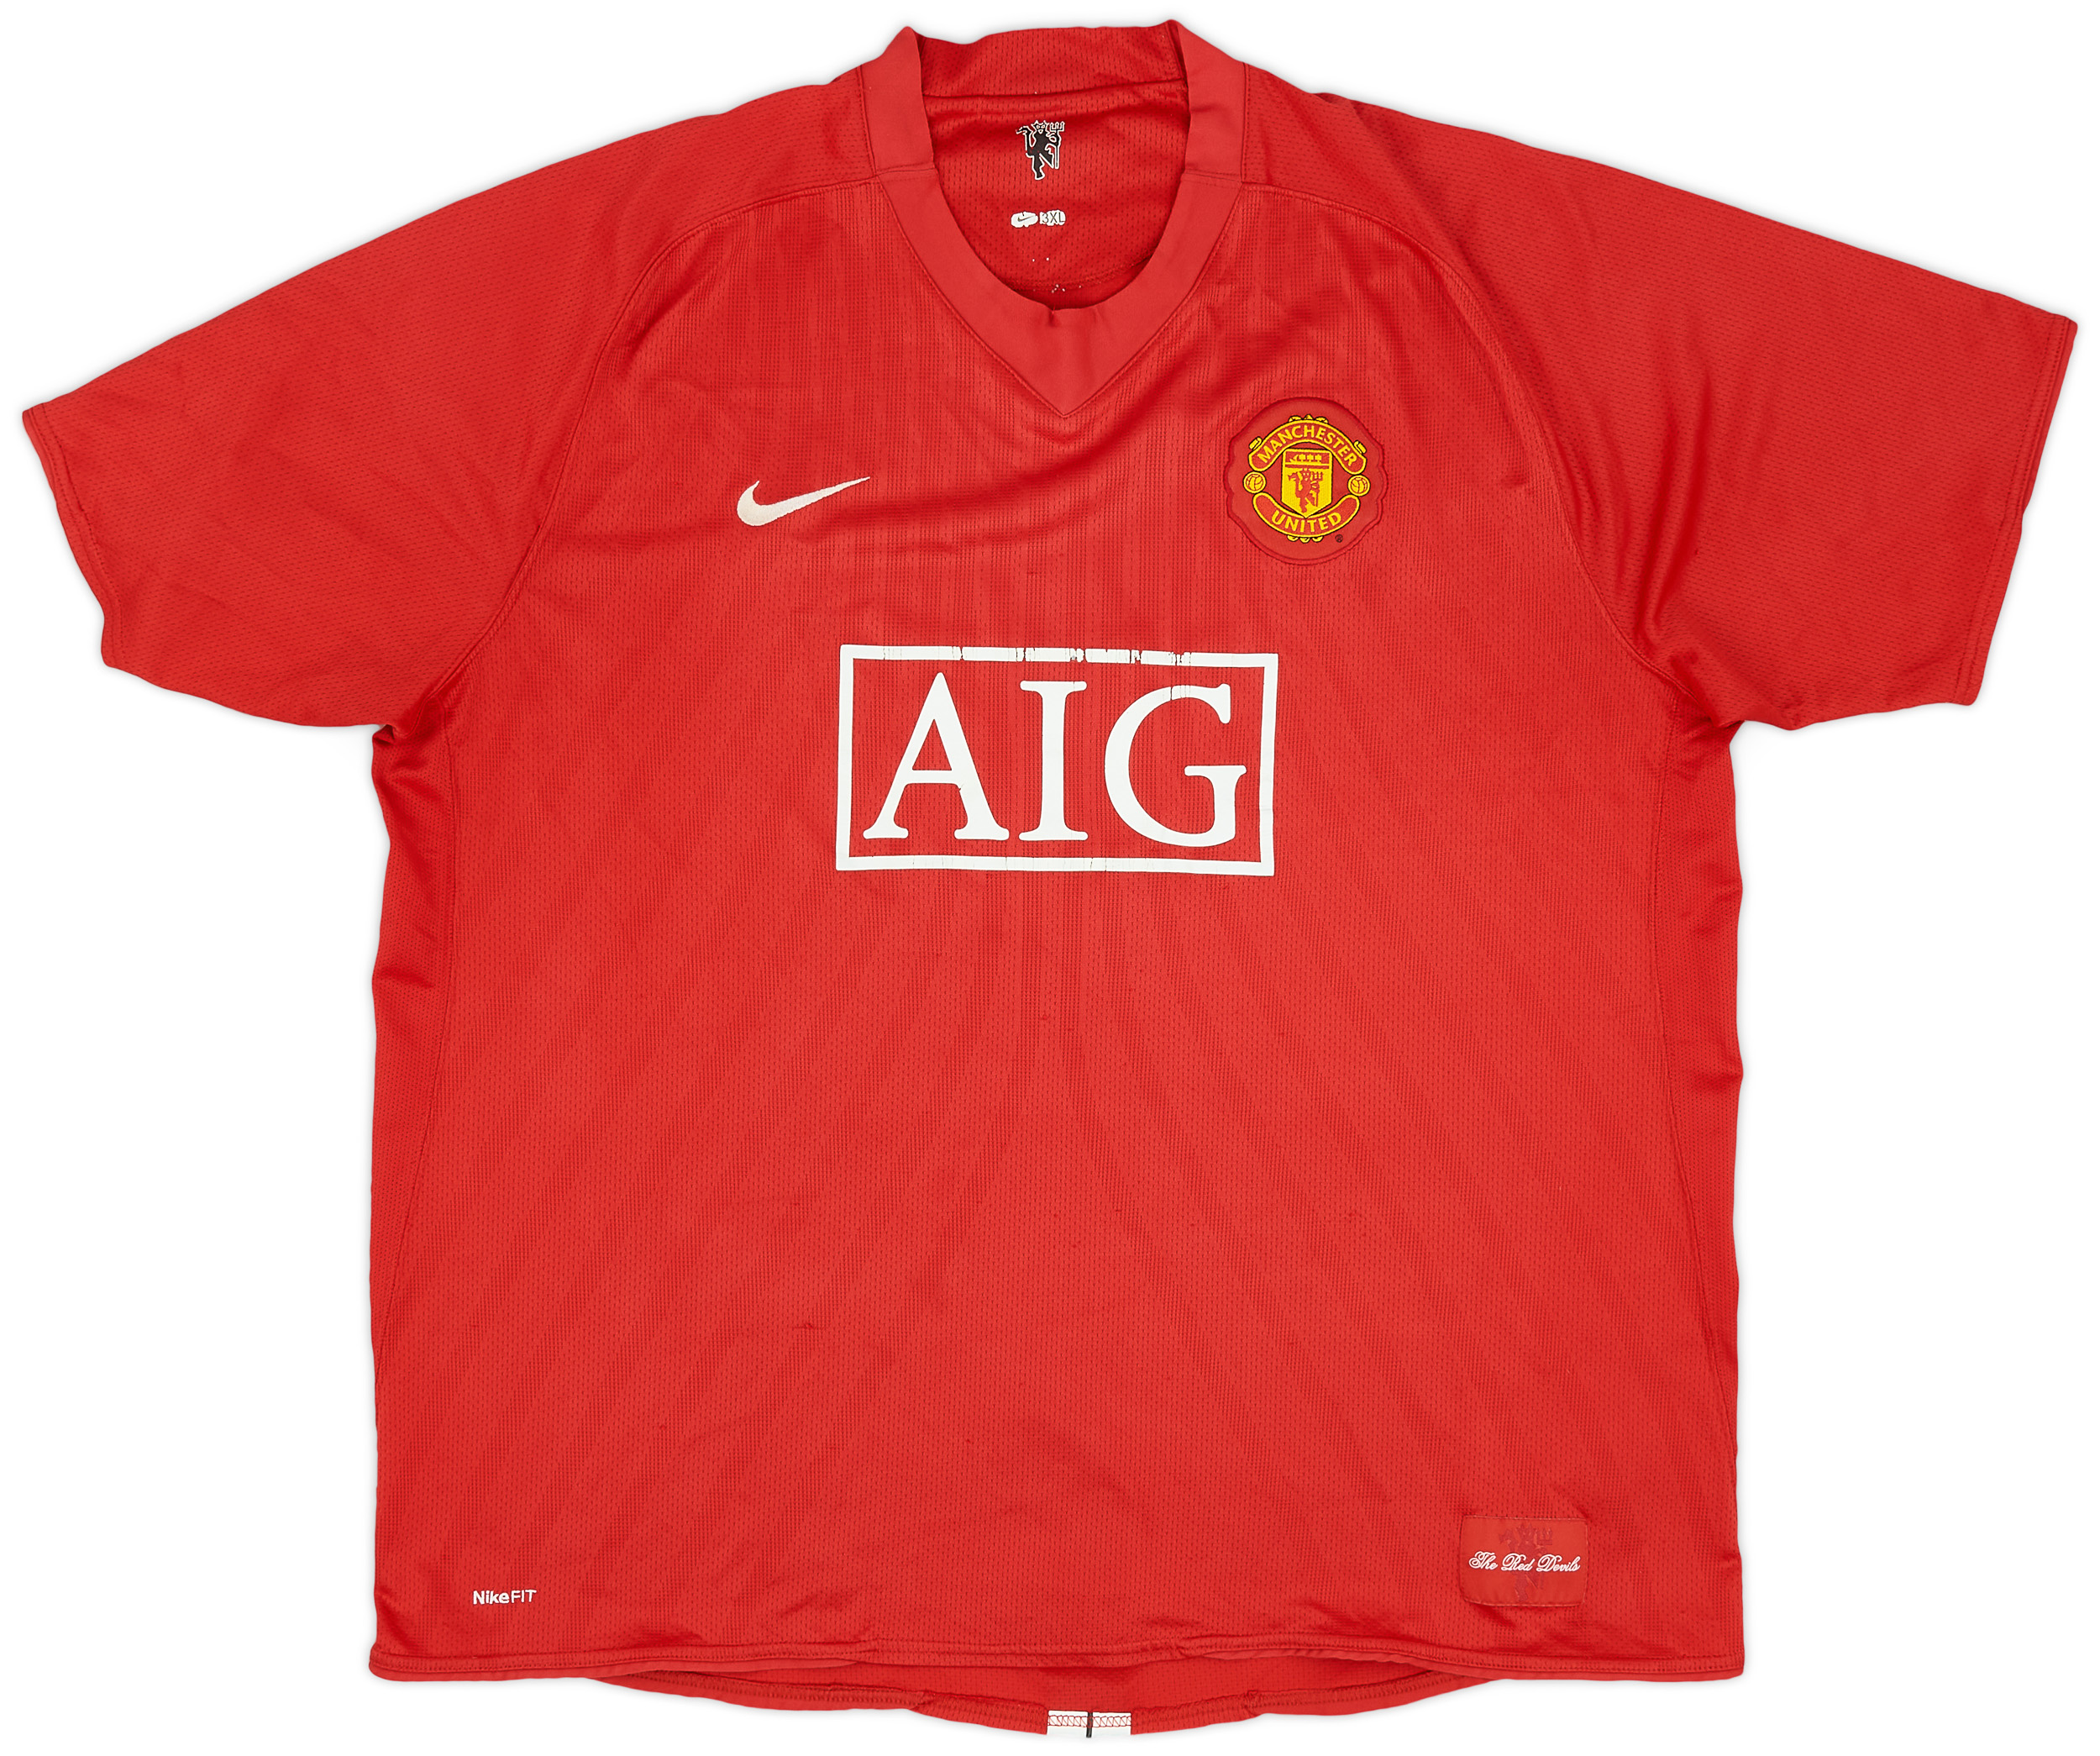 2007-09 Manchester United Home Shirt - 5/10 - ()